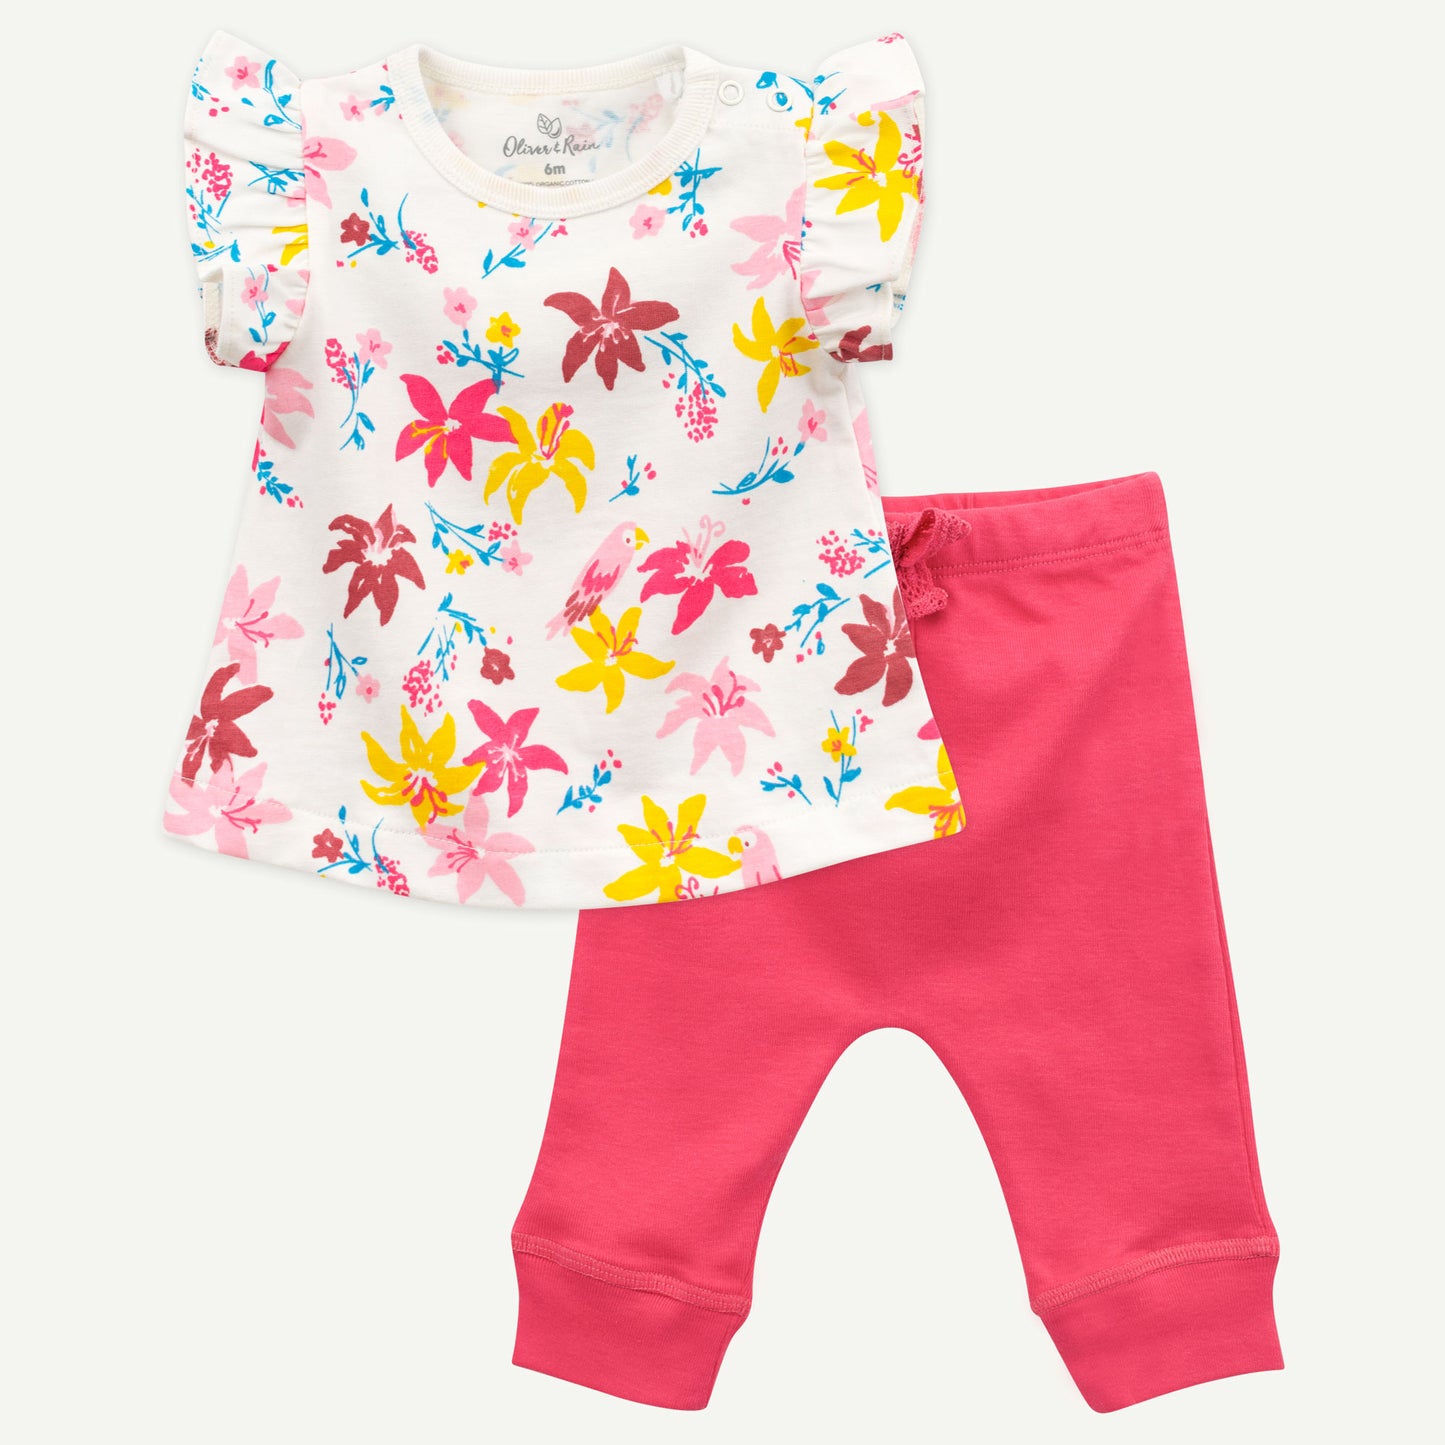 2-Piece Outfit in Bird & Lily Print